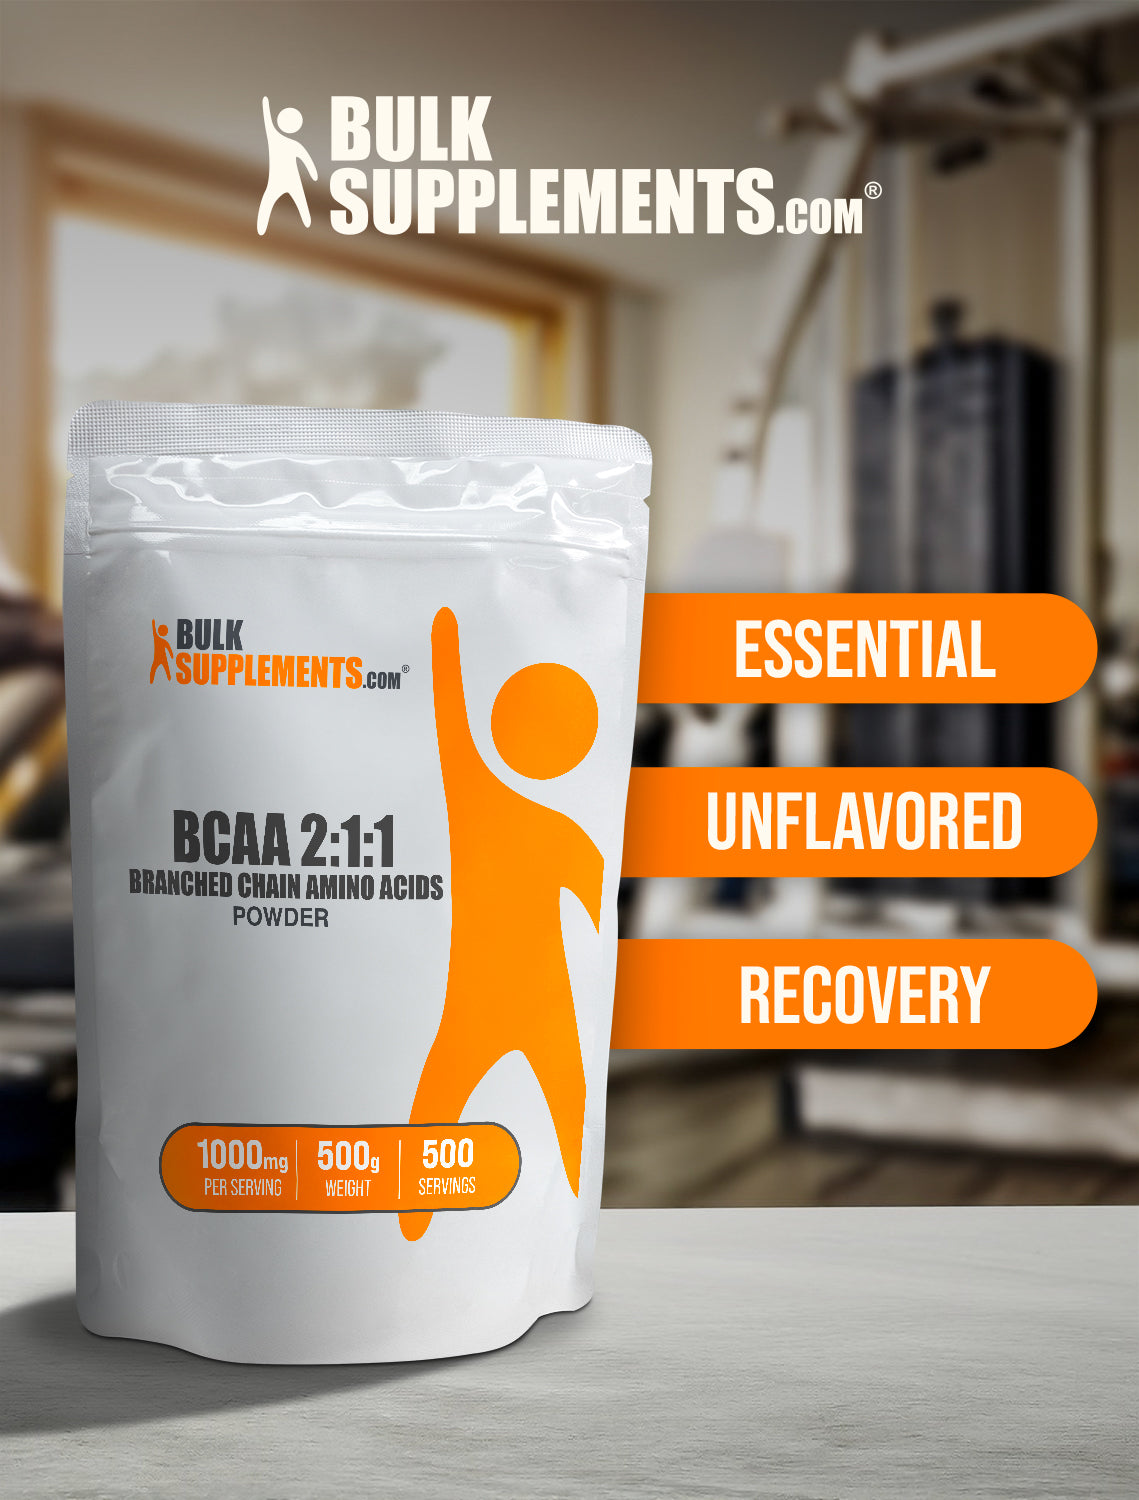 BCAA 2:1:1 (Branched Chain Amino Acids) Powder